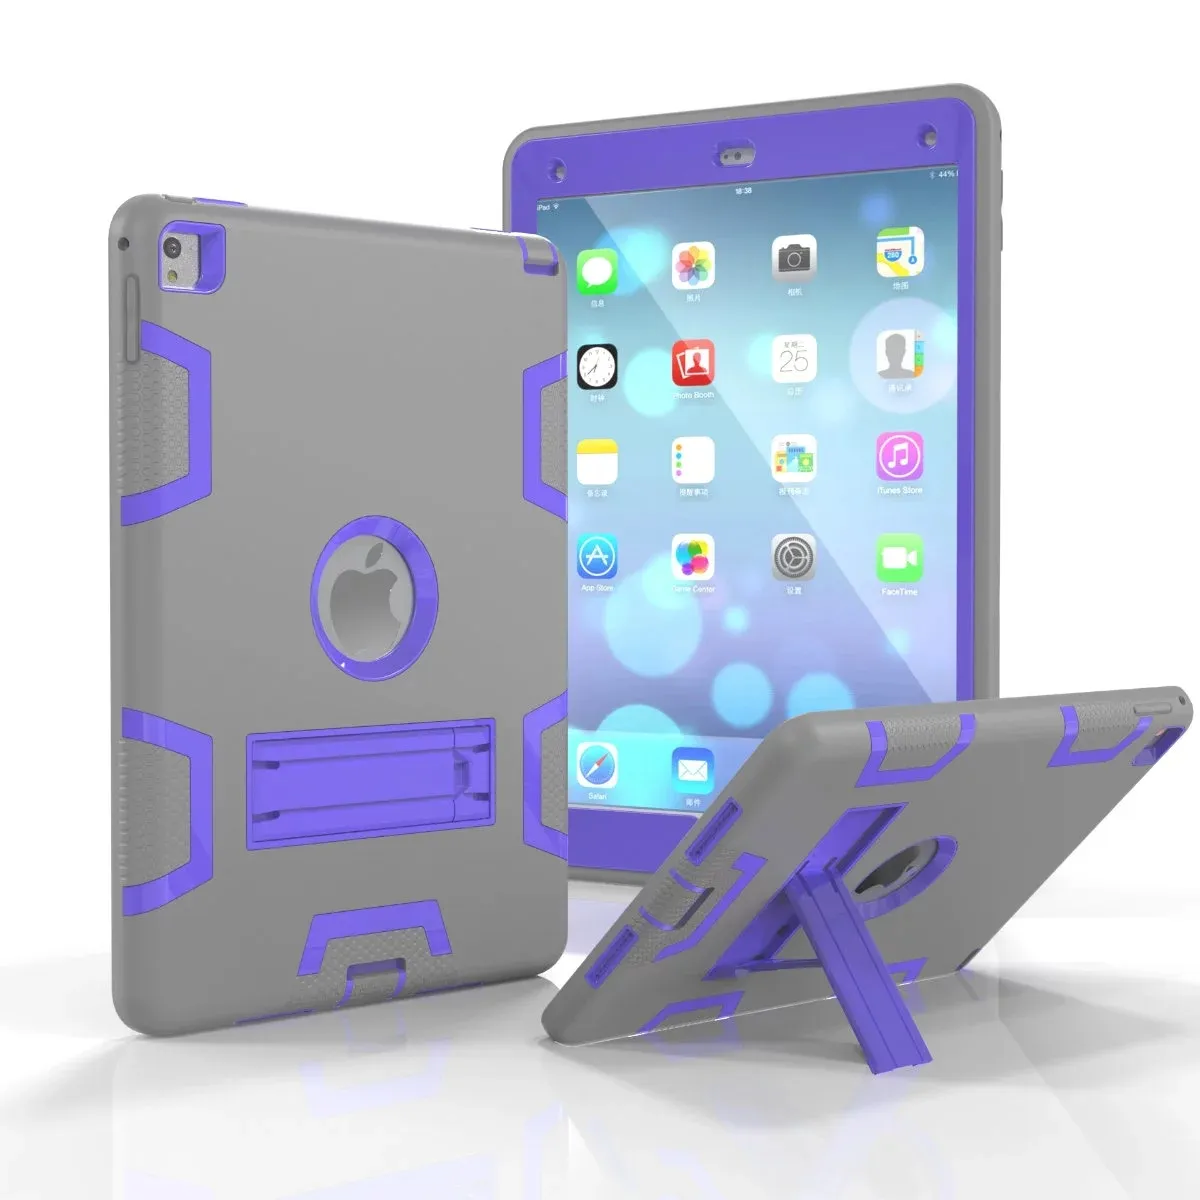 A 유형 헤비 듀티 Shockproof Kikstand Hybrid Robot Case Cover for iPad Pro 9.7 Pro 10.5 iPad 2 3 4 Air 1 Air 2 / 